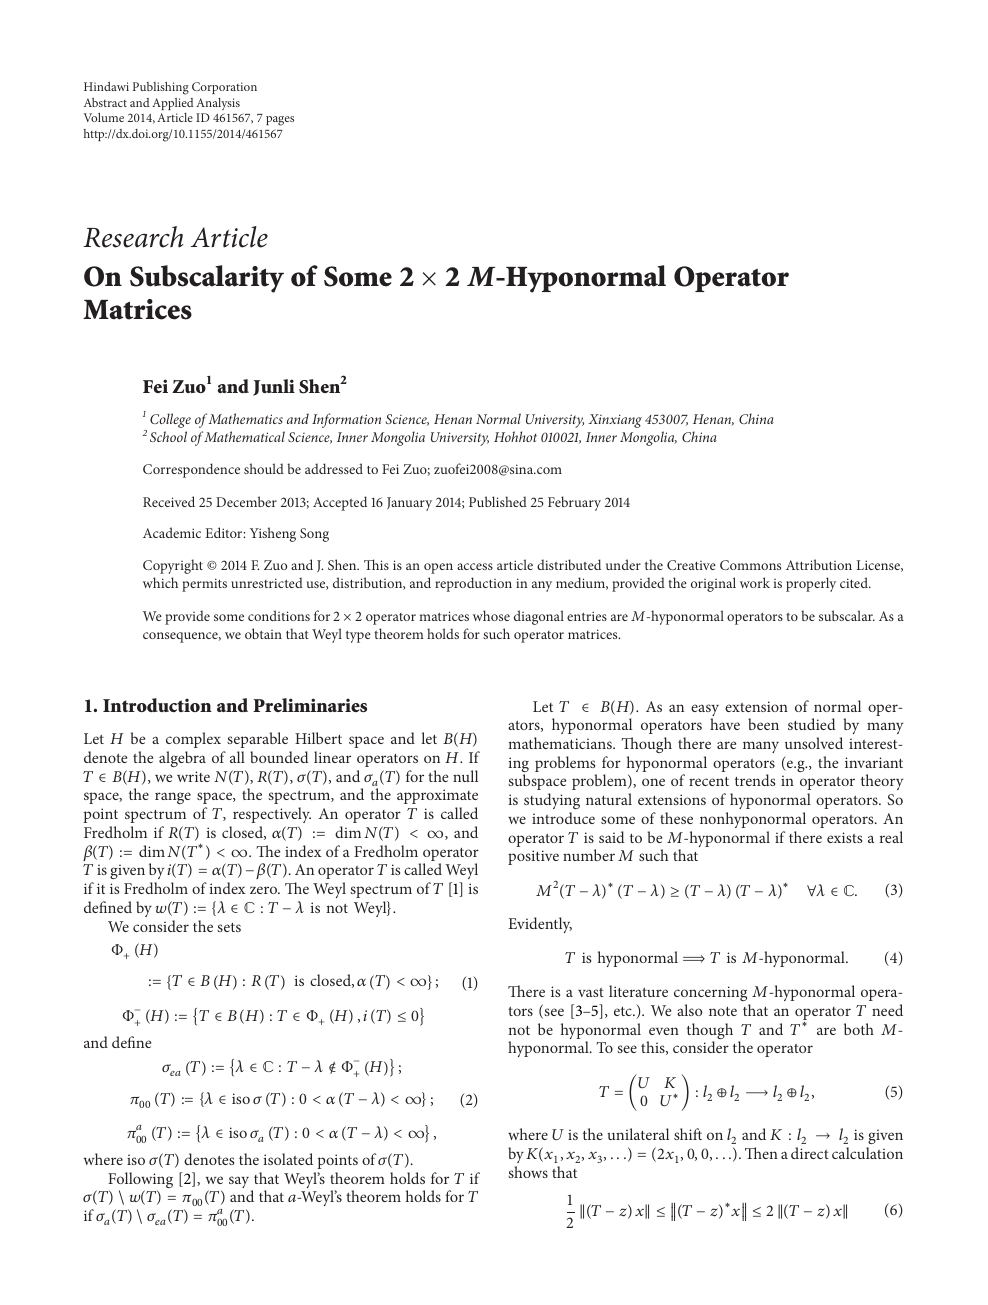 On Subscalarity Of Some 2 2 M Hyponormal Operator Matrices Topic Of Research Paper In Mathematics Download Scholarly Article Pdf And Read For Free On Cyberleninka Open Science Hub